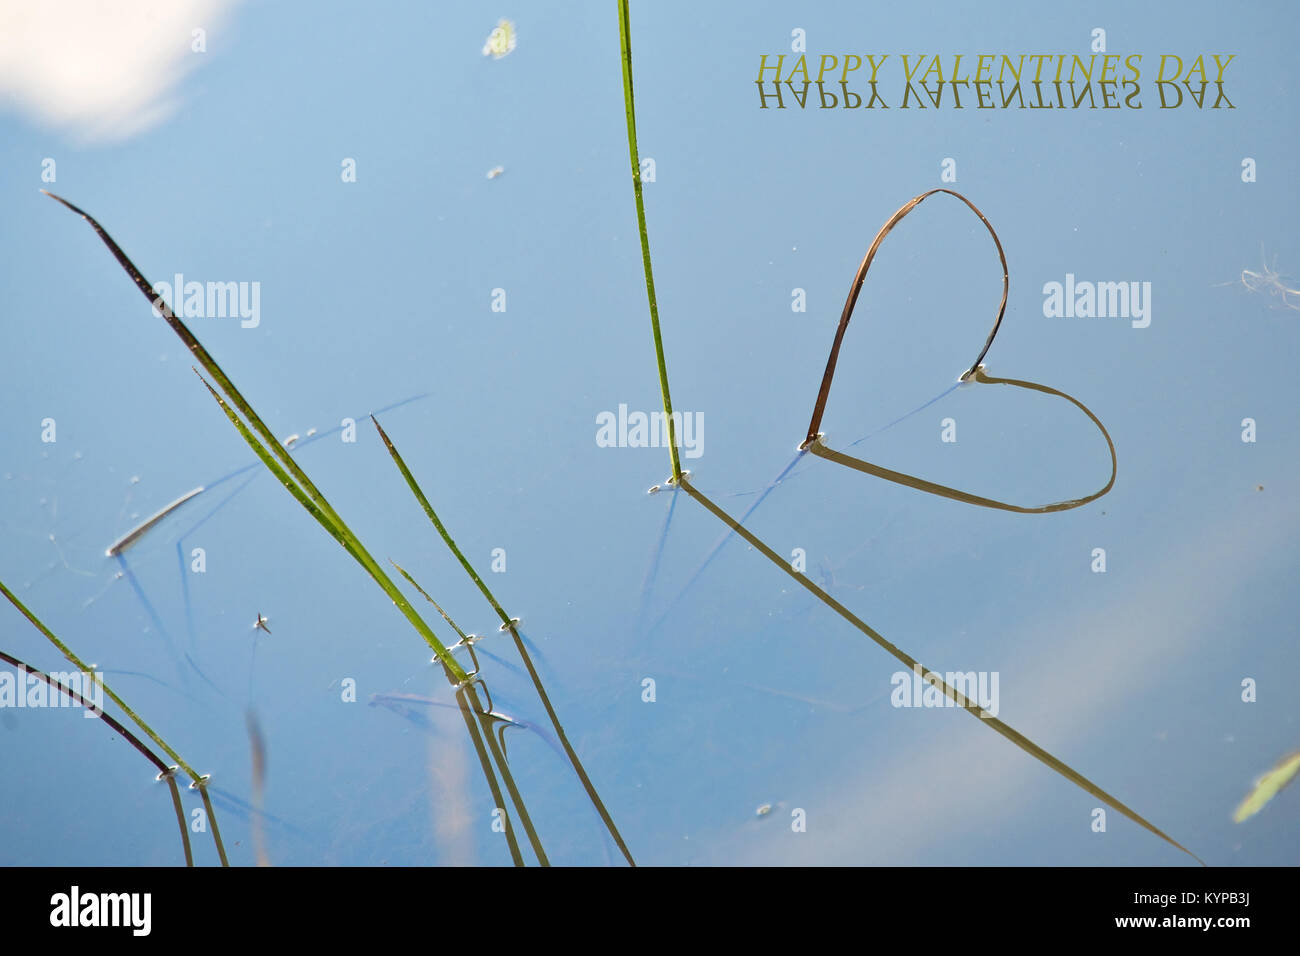 Valentines day card, grass in water and reflections in the shape of a heart Stock Photo